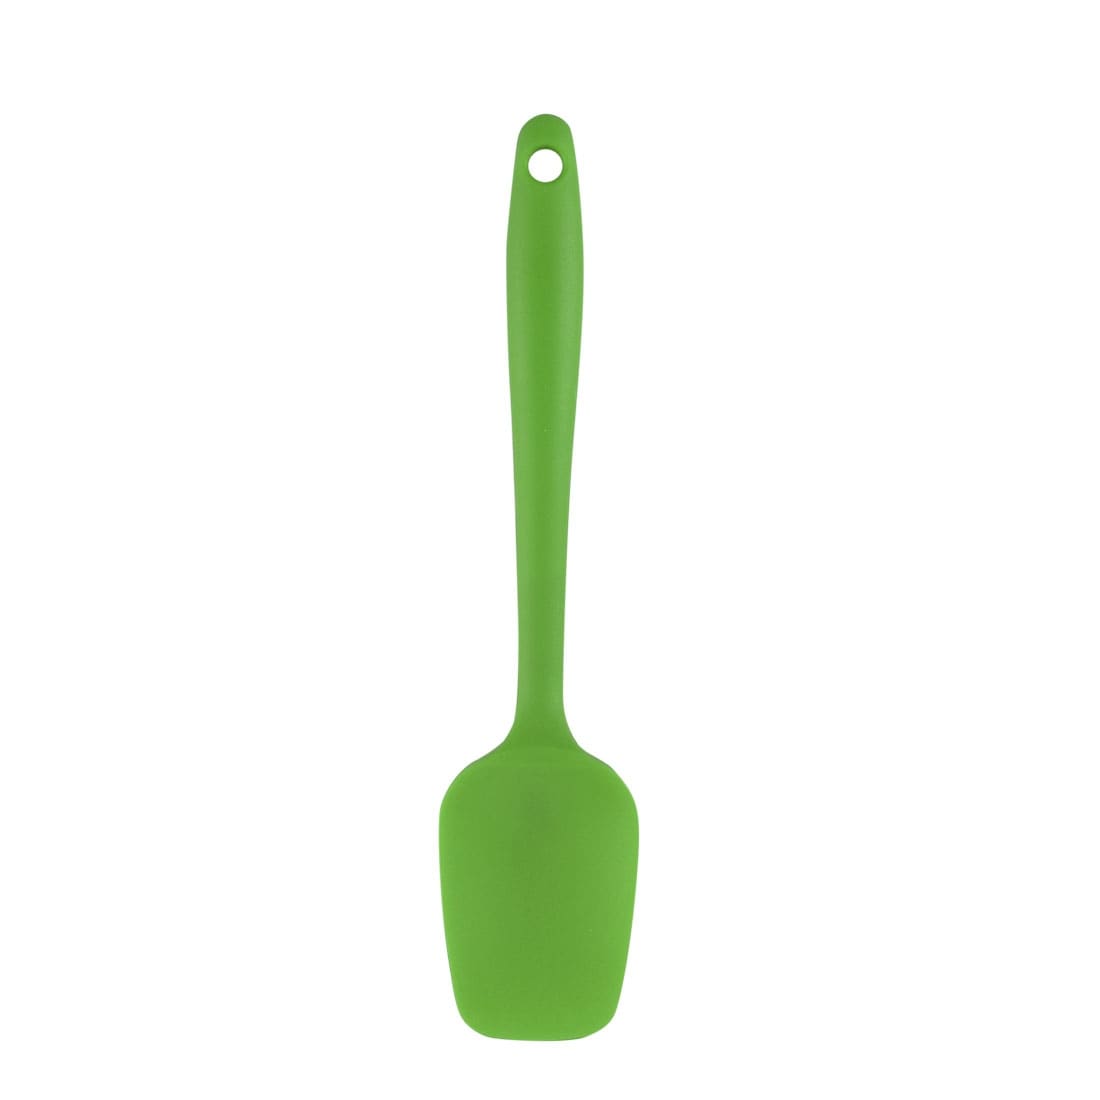 https://ak1.ostkcdn.com/images/products/is/images/direct/62aef911a94aecff239235cea3729b7c3dda01cd/Silicone-Spatula-Heat-Resistant-Rubber-Flipping-Turner-for-Cooking.jpg